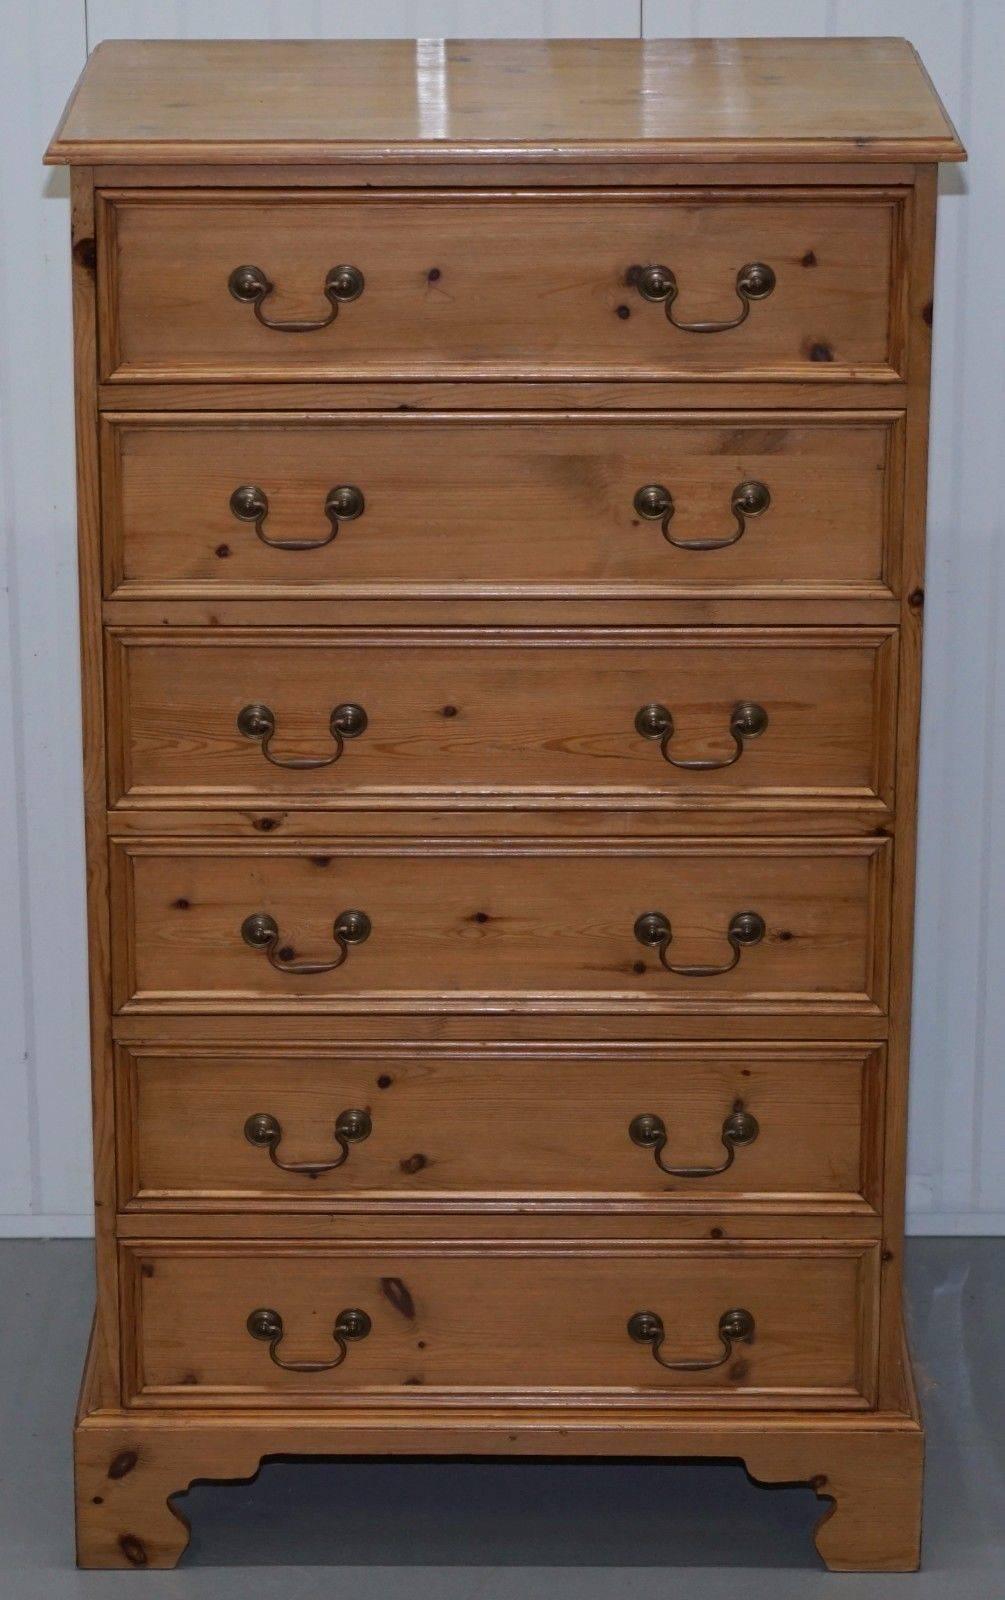 Modern Vintage Farmhouse Country Large Deep Tallboy Chest of Drawers Swan Neck Handles